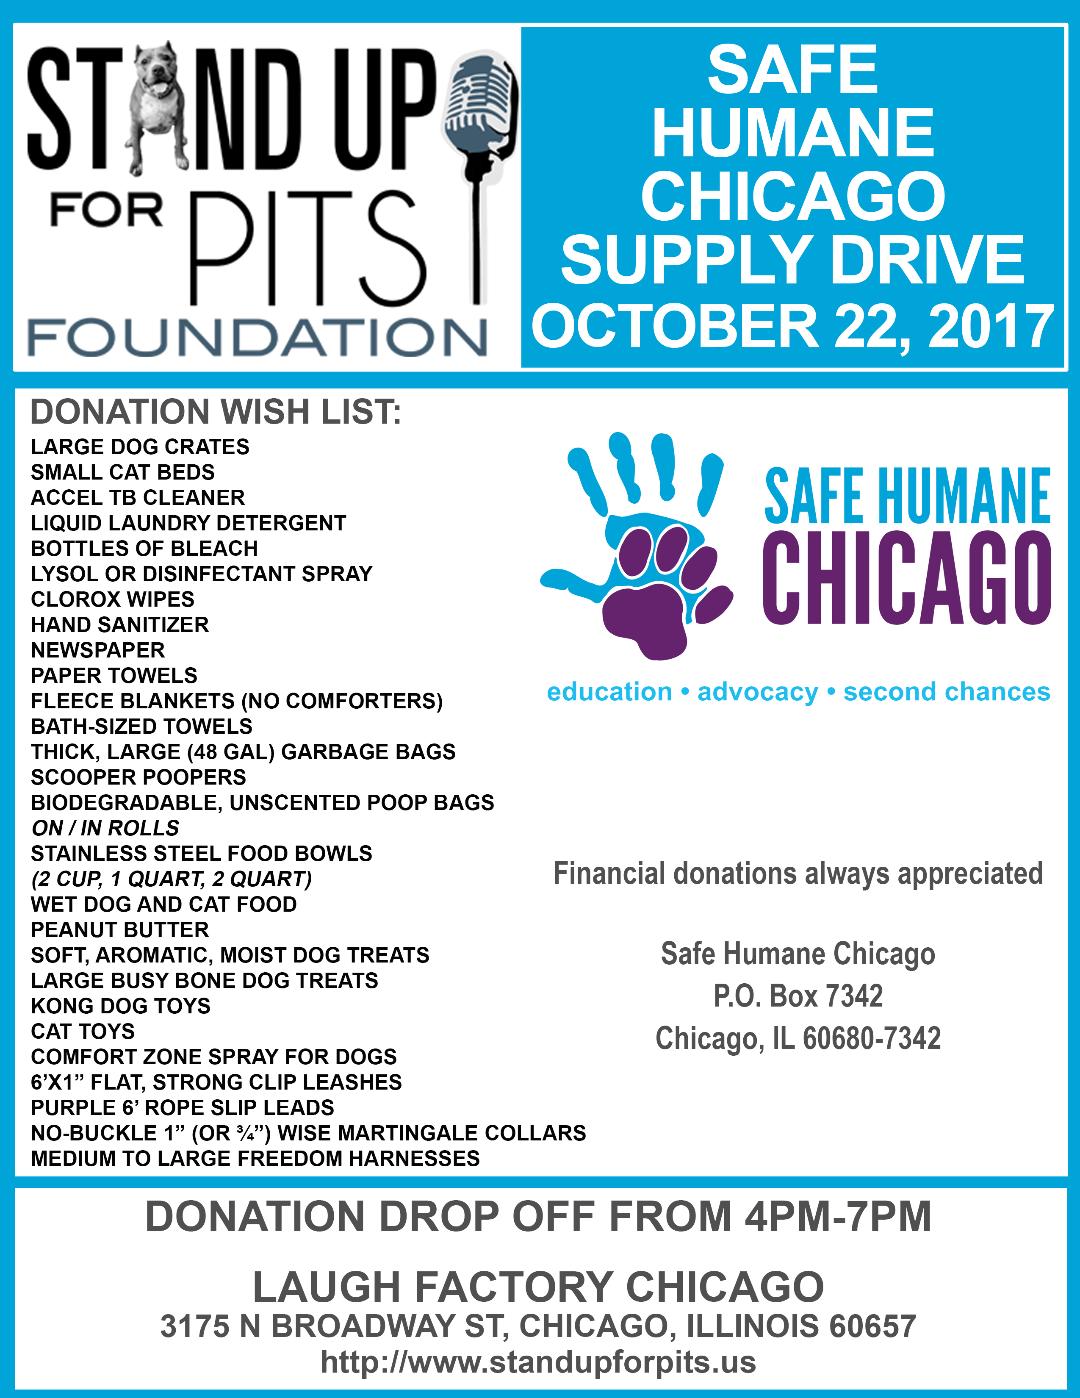 SUFP Donation Drive CHICAGO happens in 16 DAYS!!